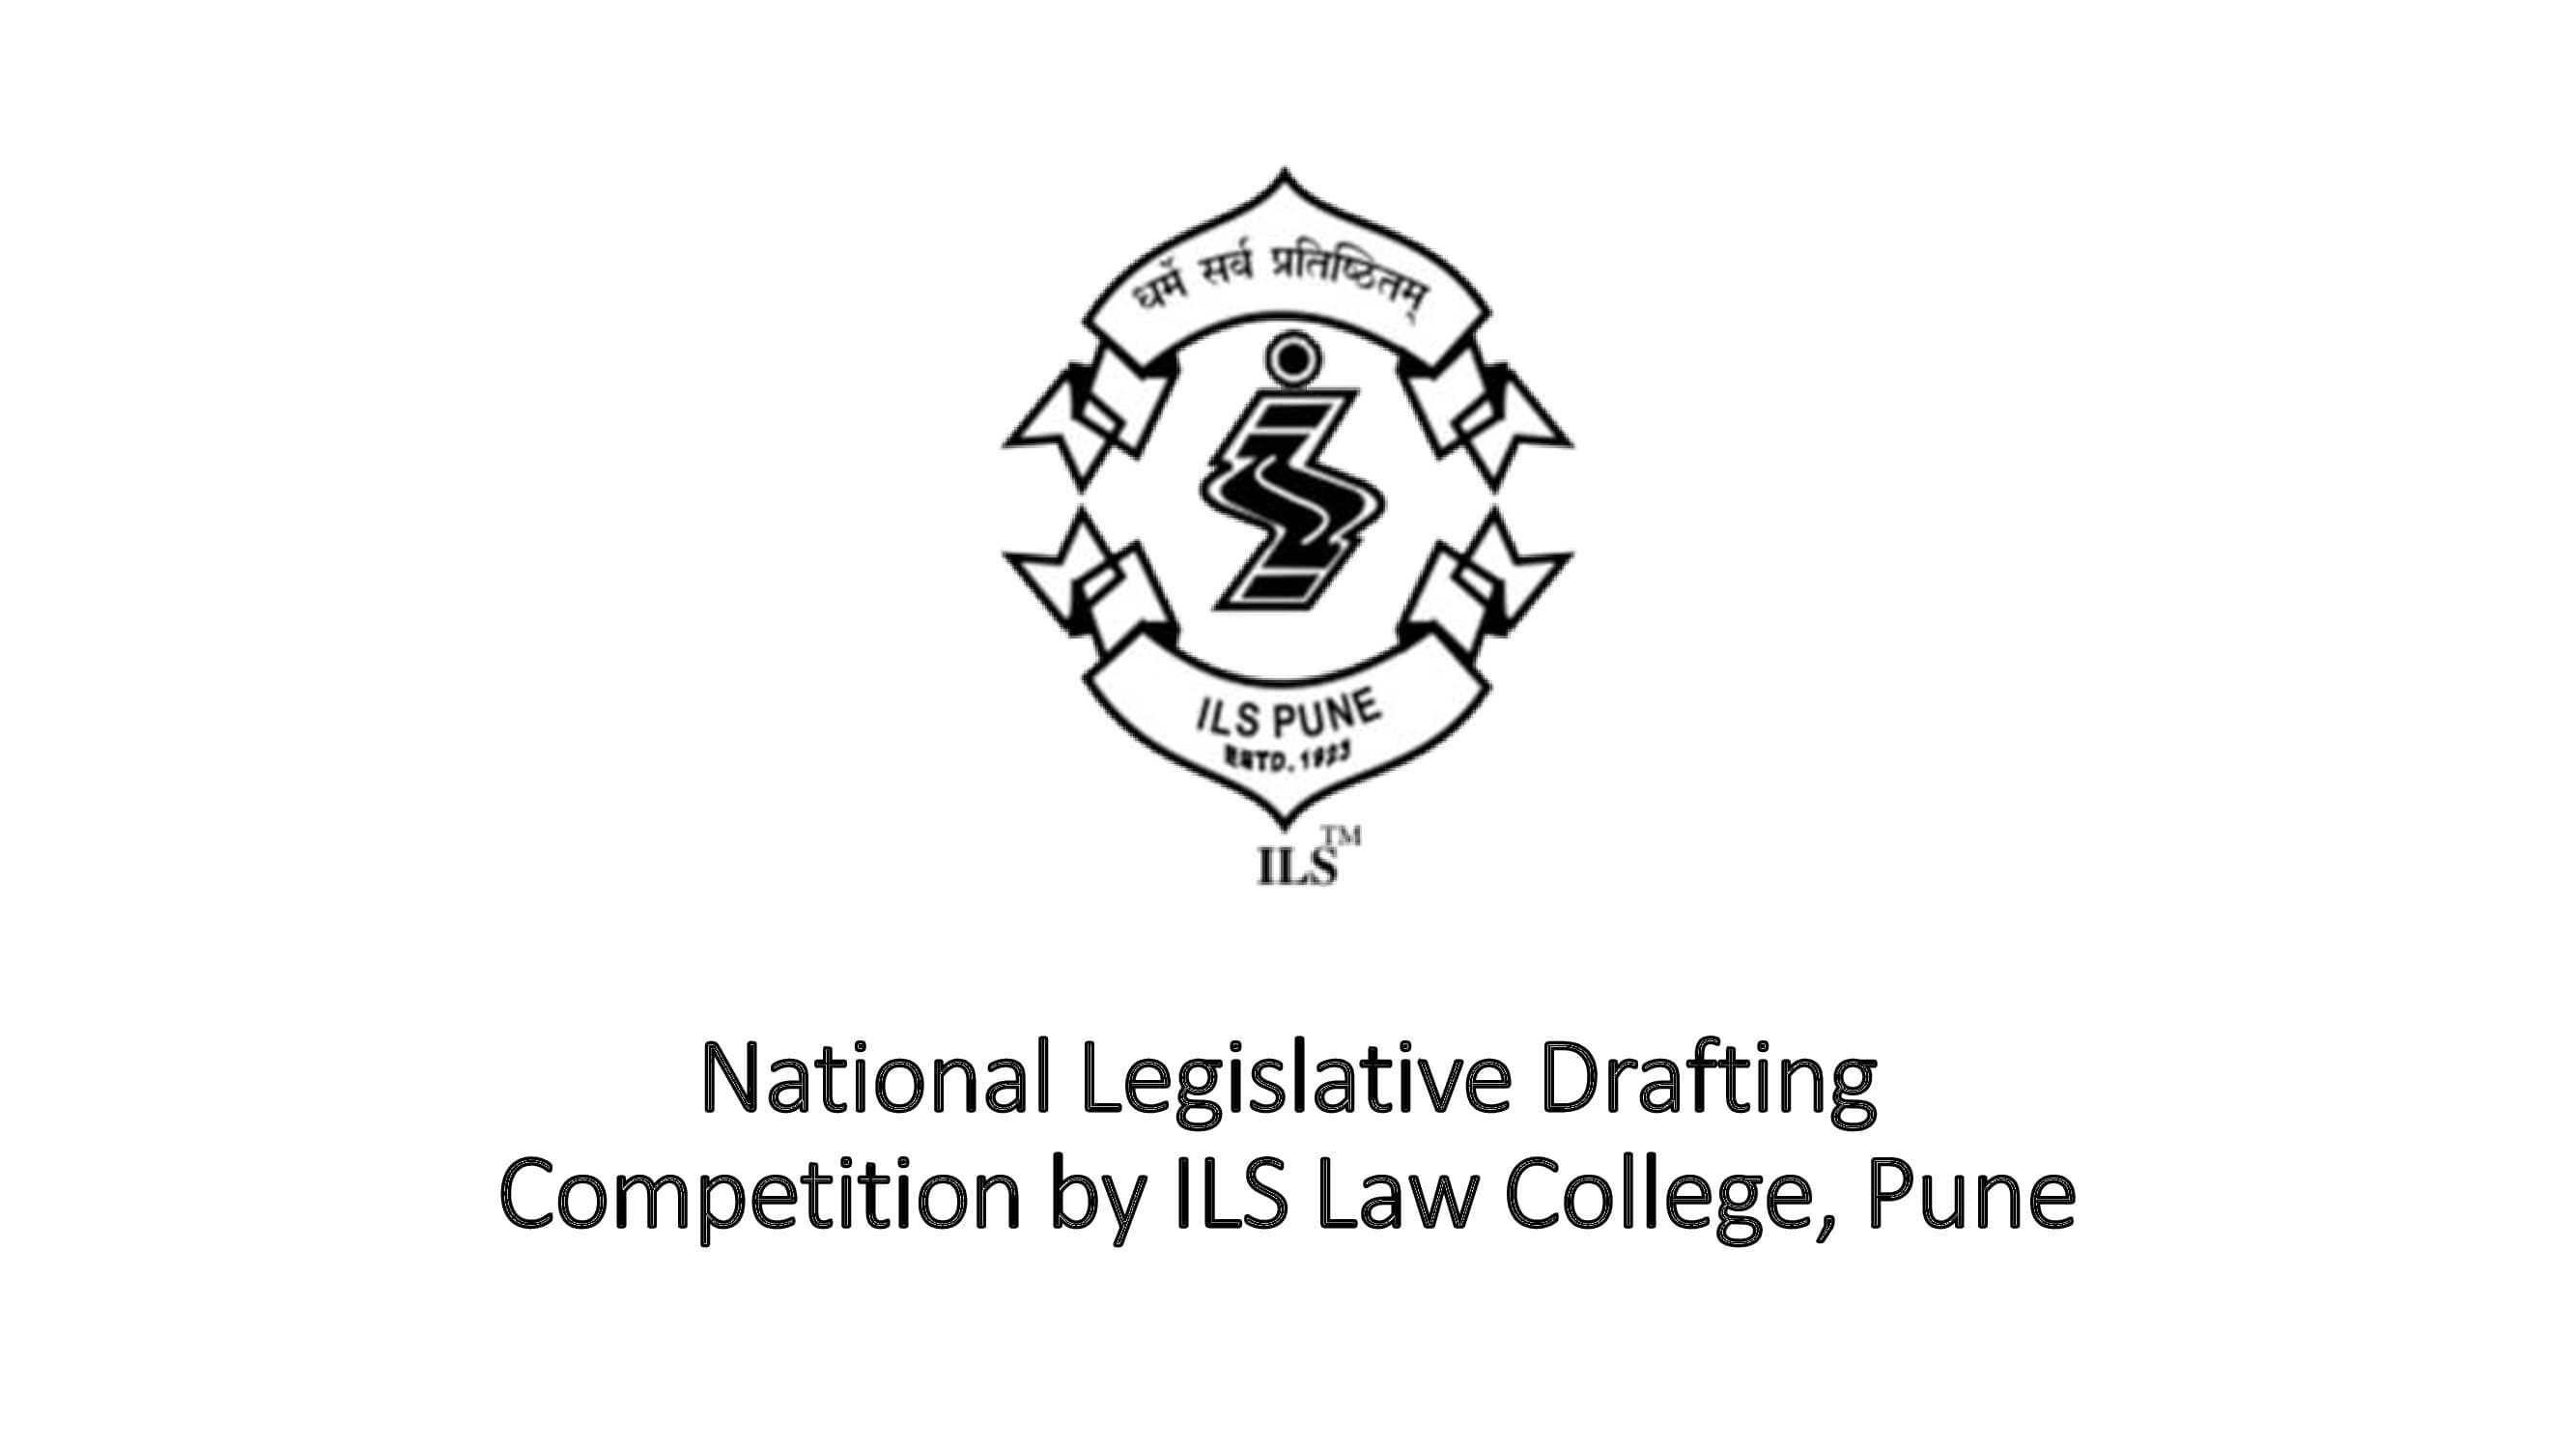 National Legislative Drafting Competition by ILS Law College, Pune